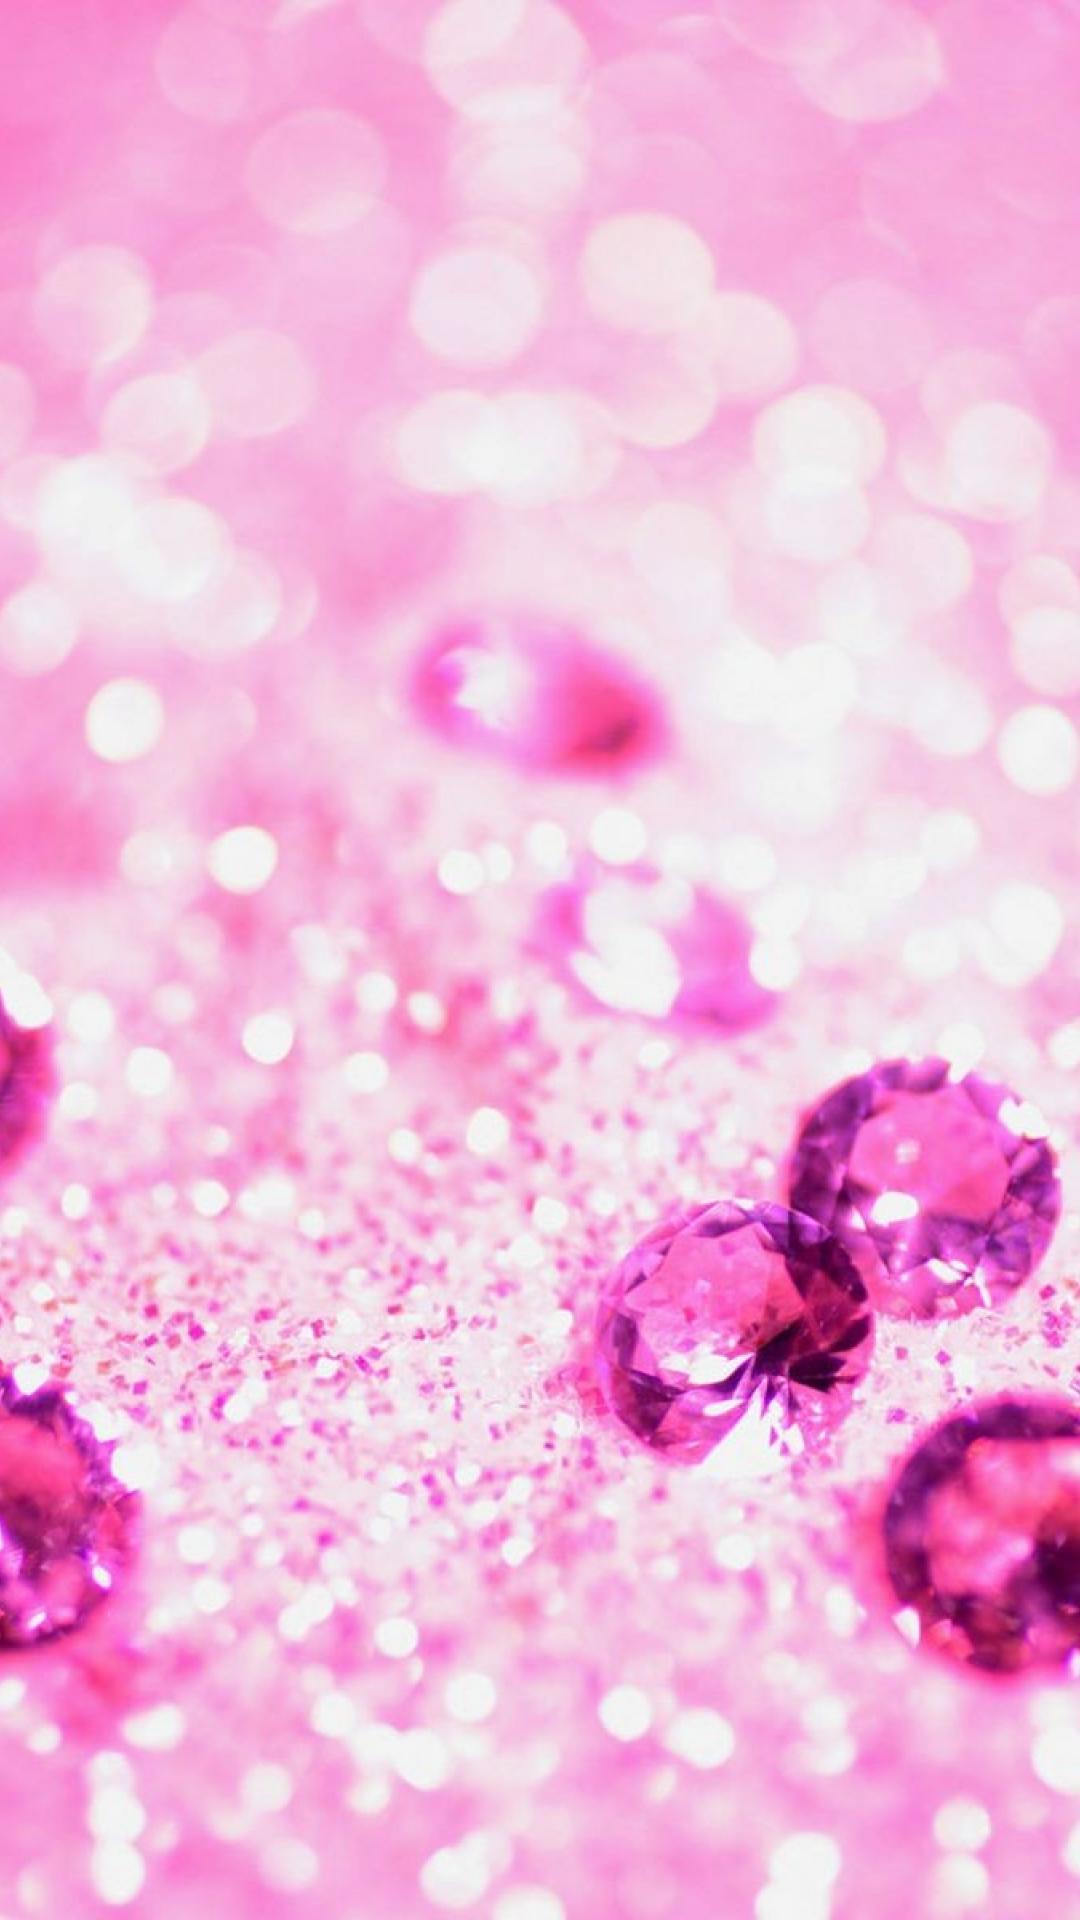 Lots of pink jewelry. Girly glitter iPhone wallpaper. iPhone